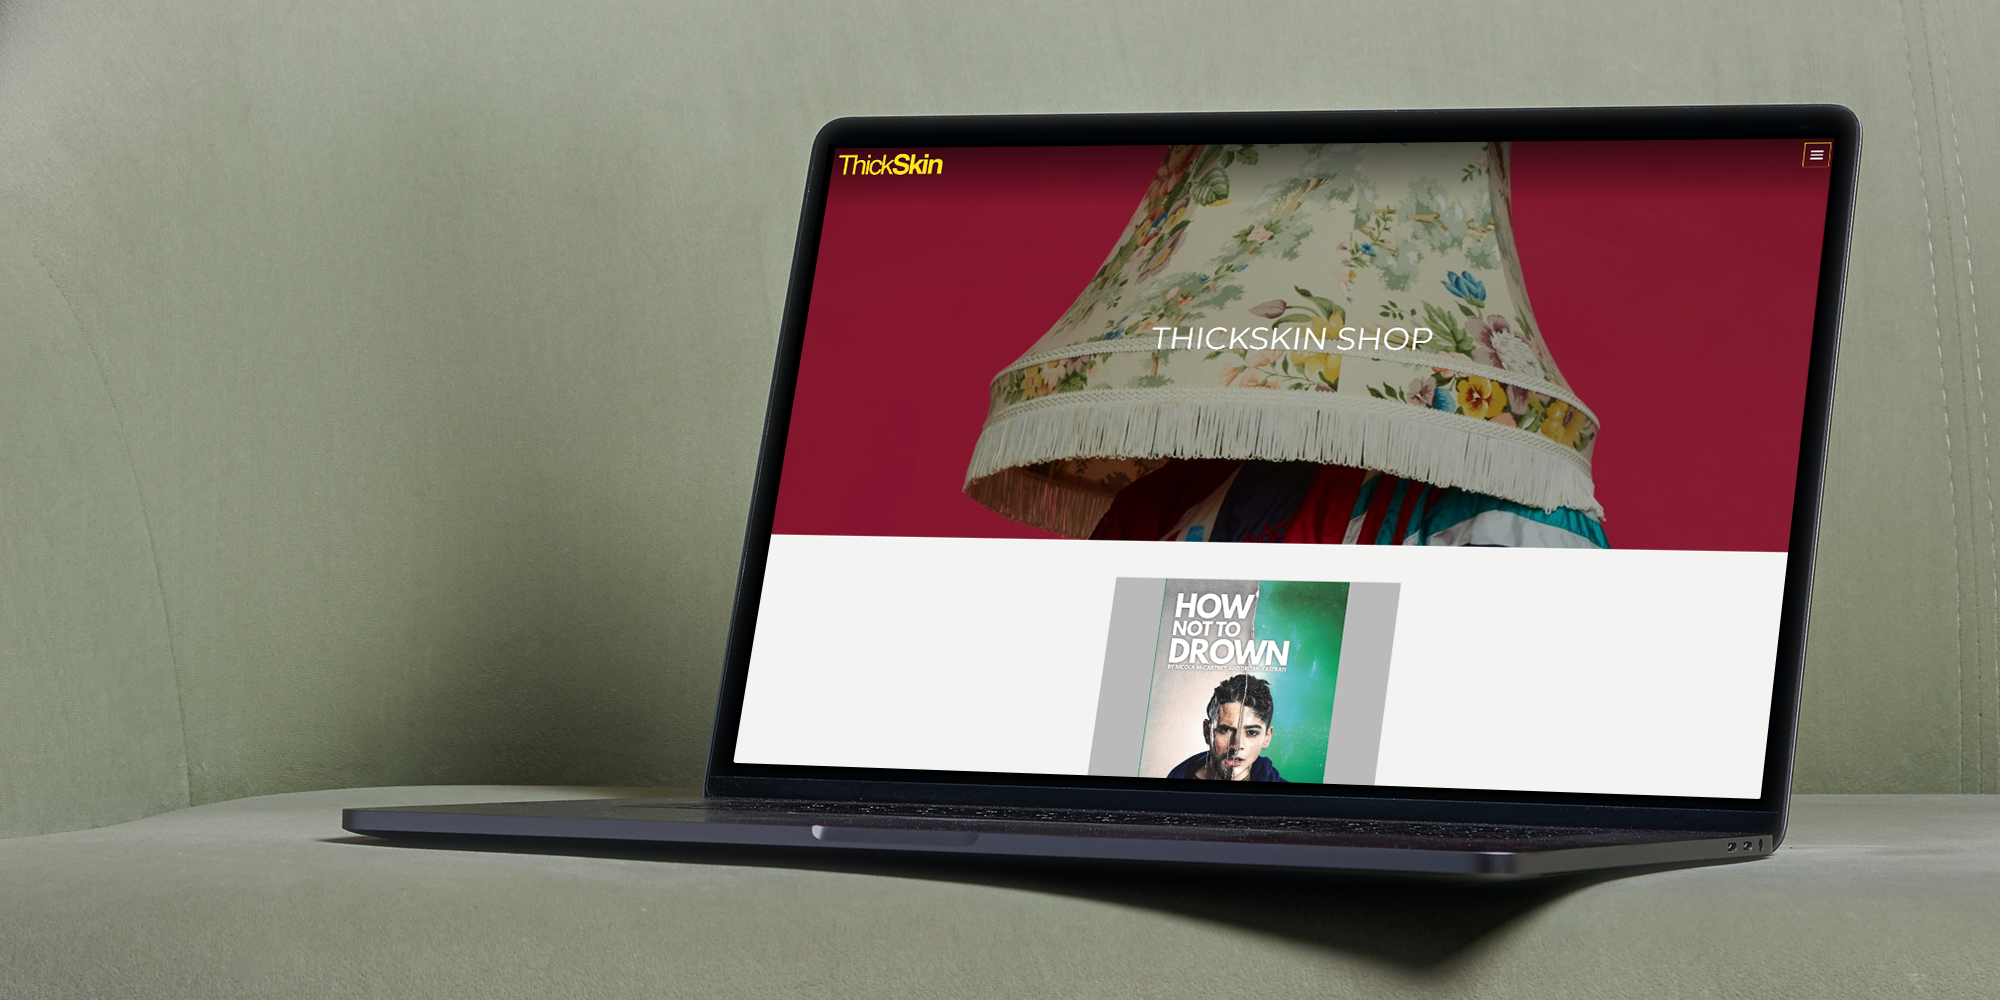 ThickSkin shop page shown on a laptop